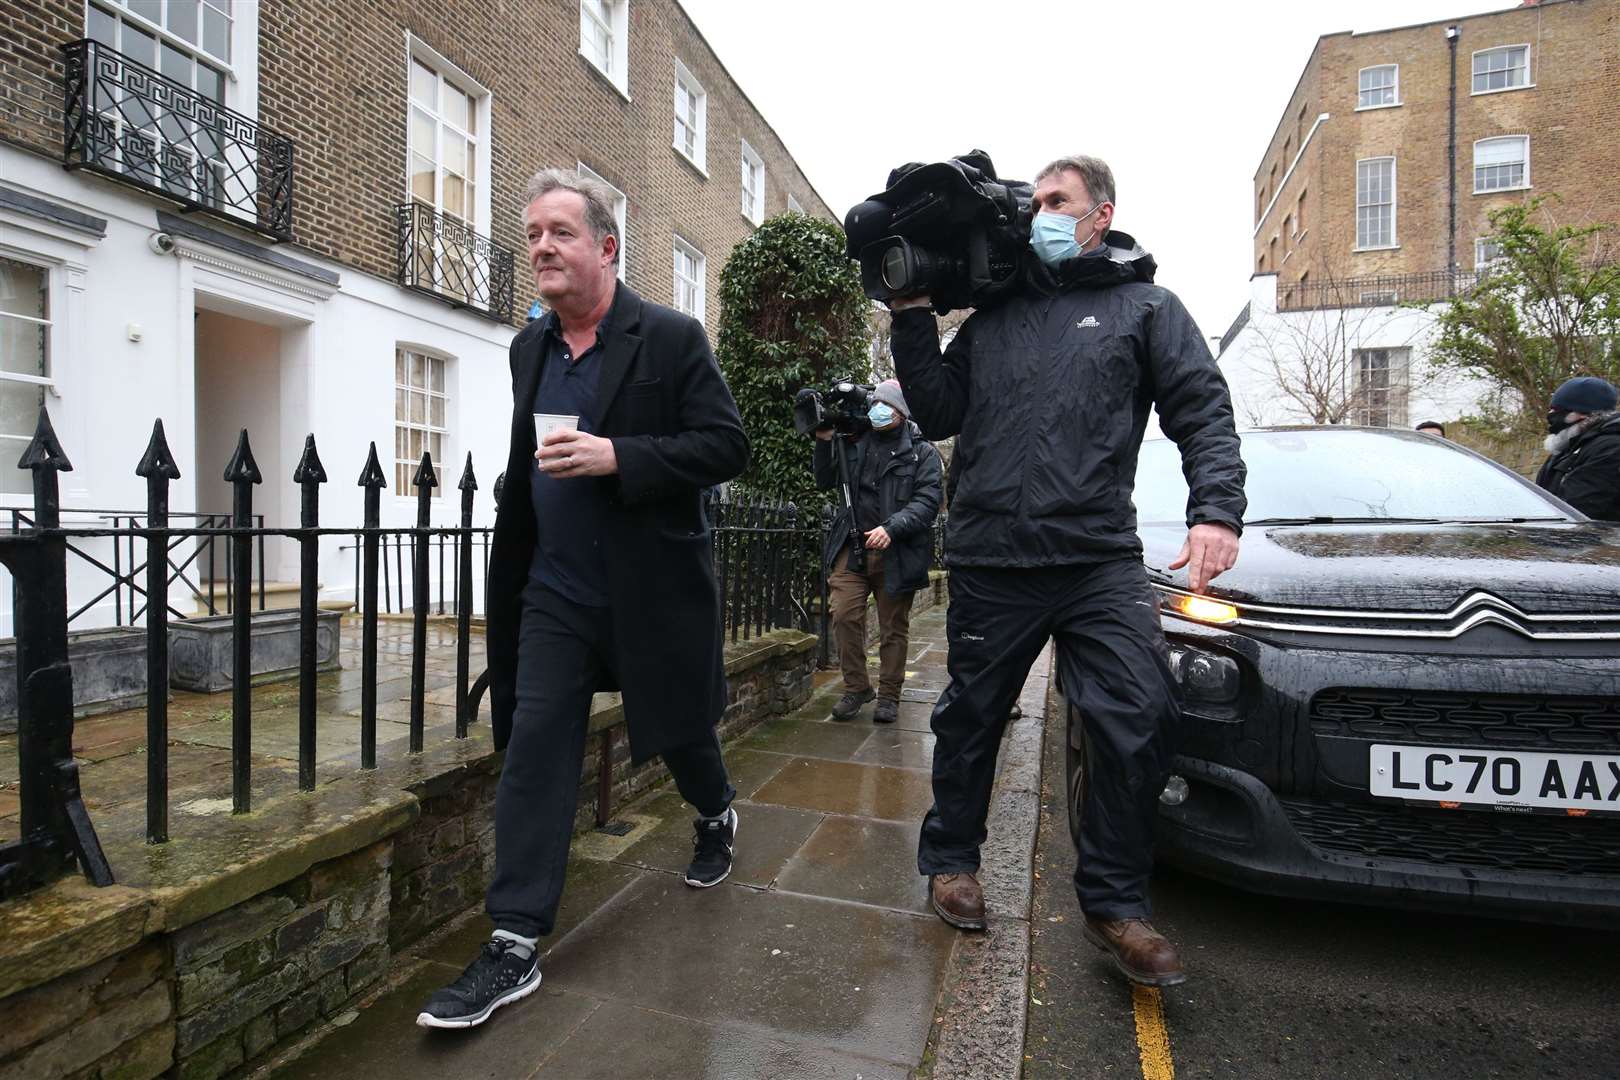 Piers Morgan said the reaction to his comments on the Sussex’s interview was intense (Jonathan Brady/PA)